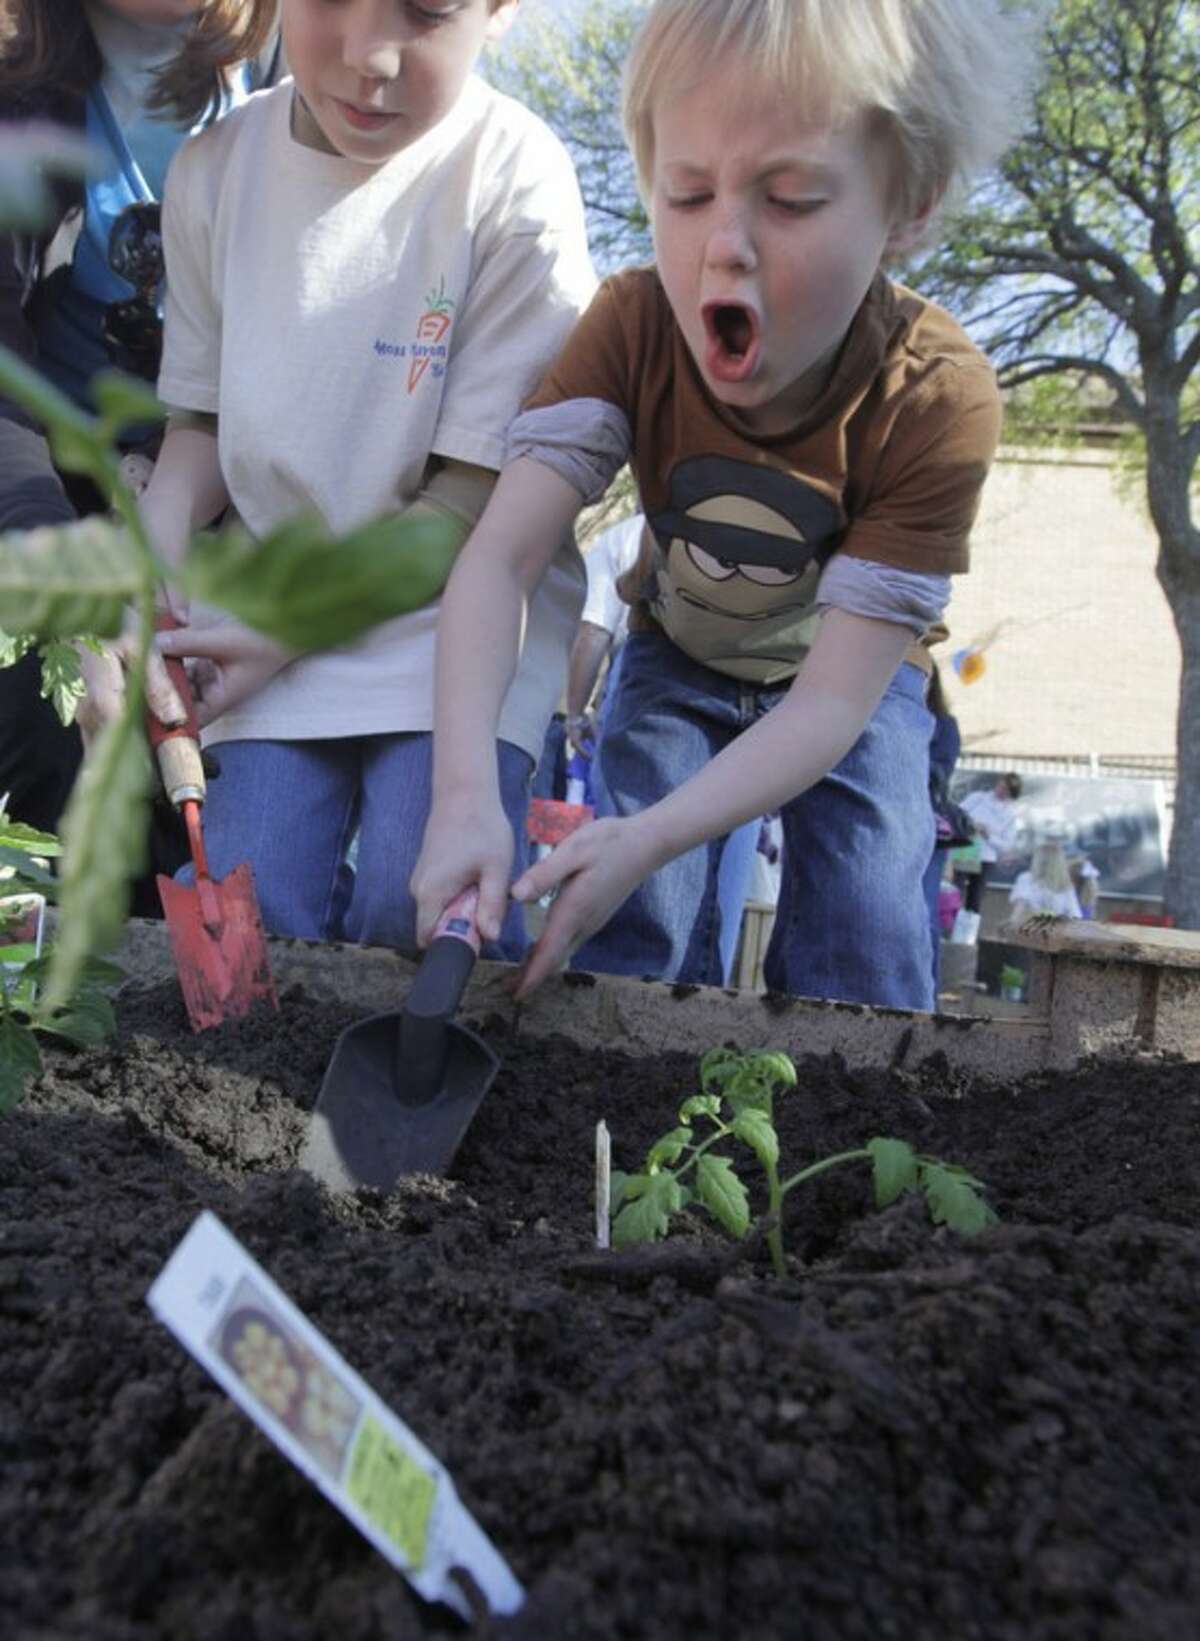 In this photo taken on March 27, 2012, elementary students plant vegetables in a garden at Moss Haven Elementary school in Dallas, T.X. Gardens planted in schoolyards nationally are intended to encourage healthier eating, and also teach young students about the environment, science, teamwork, math and leadership. (AP Photo/LM Otero)